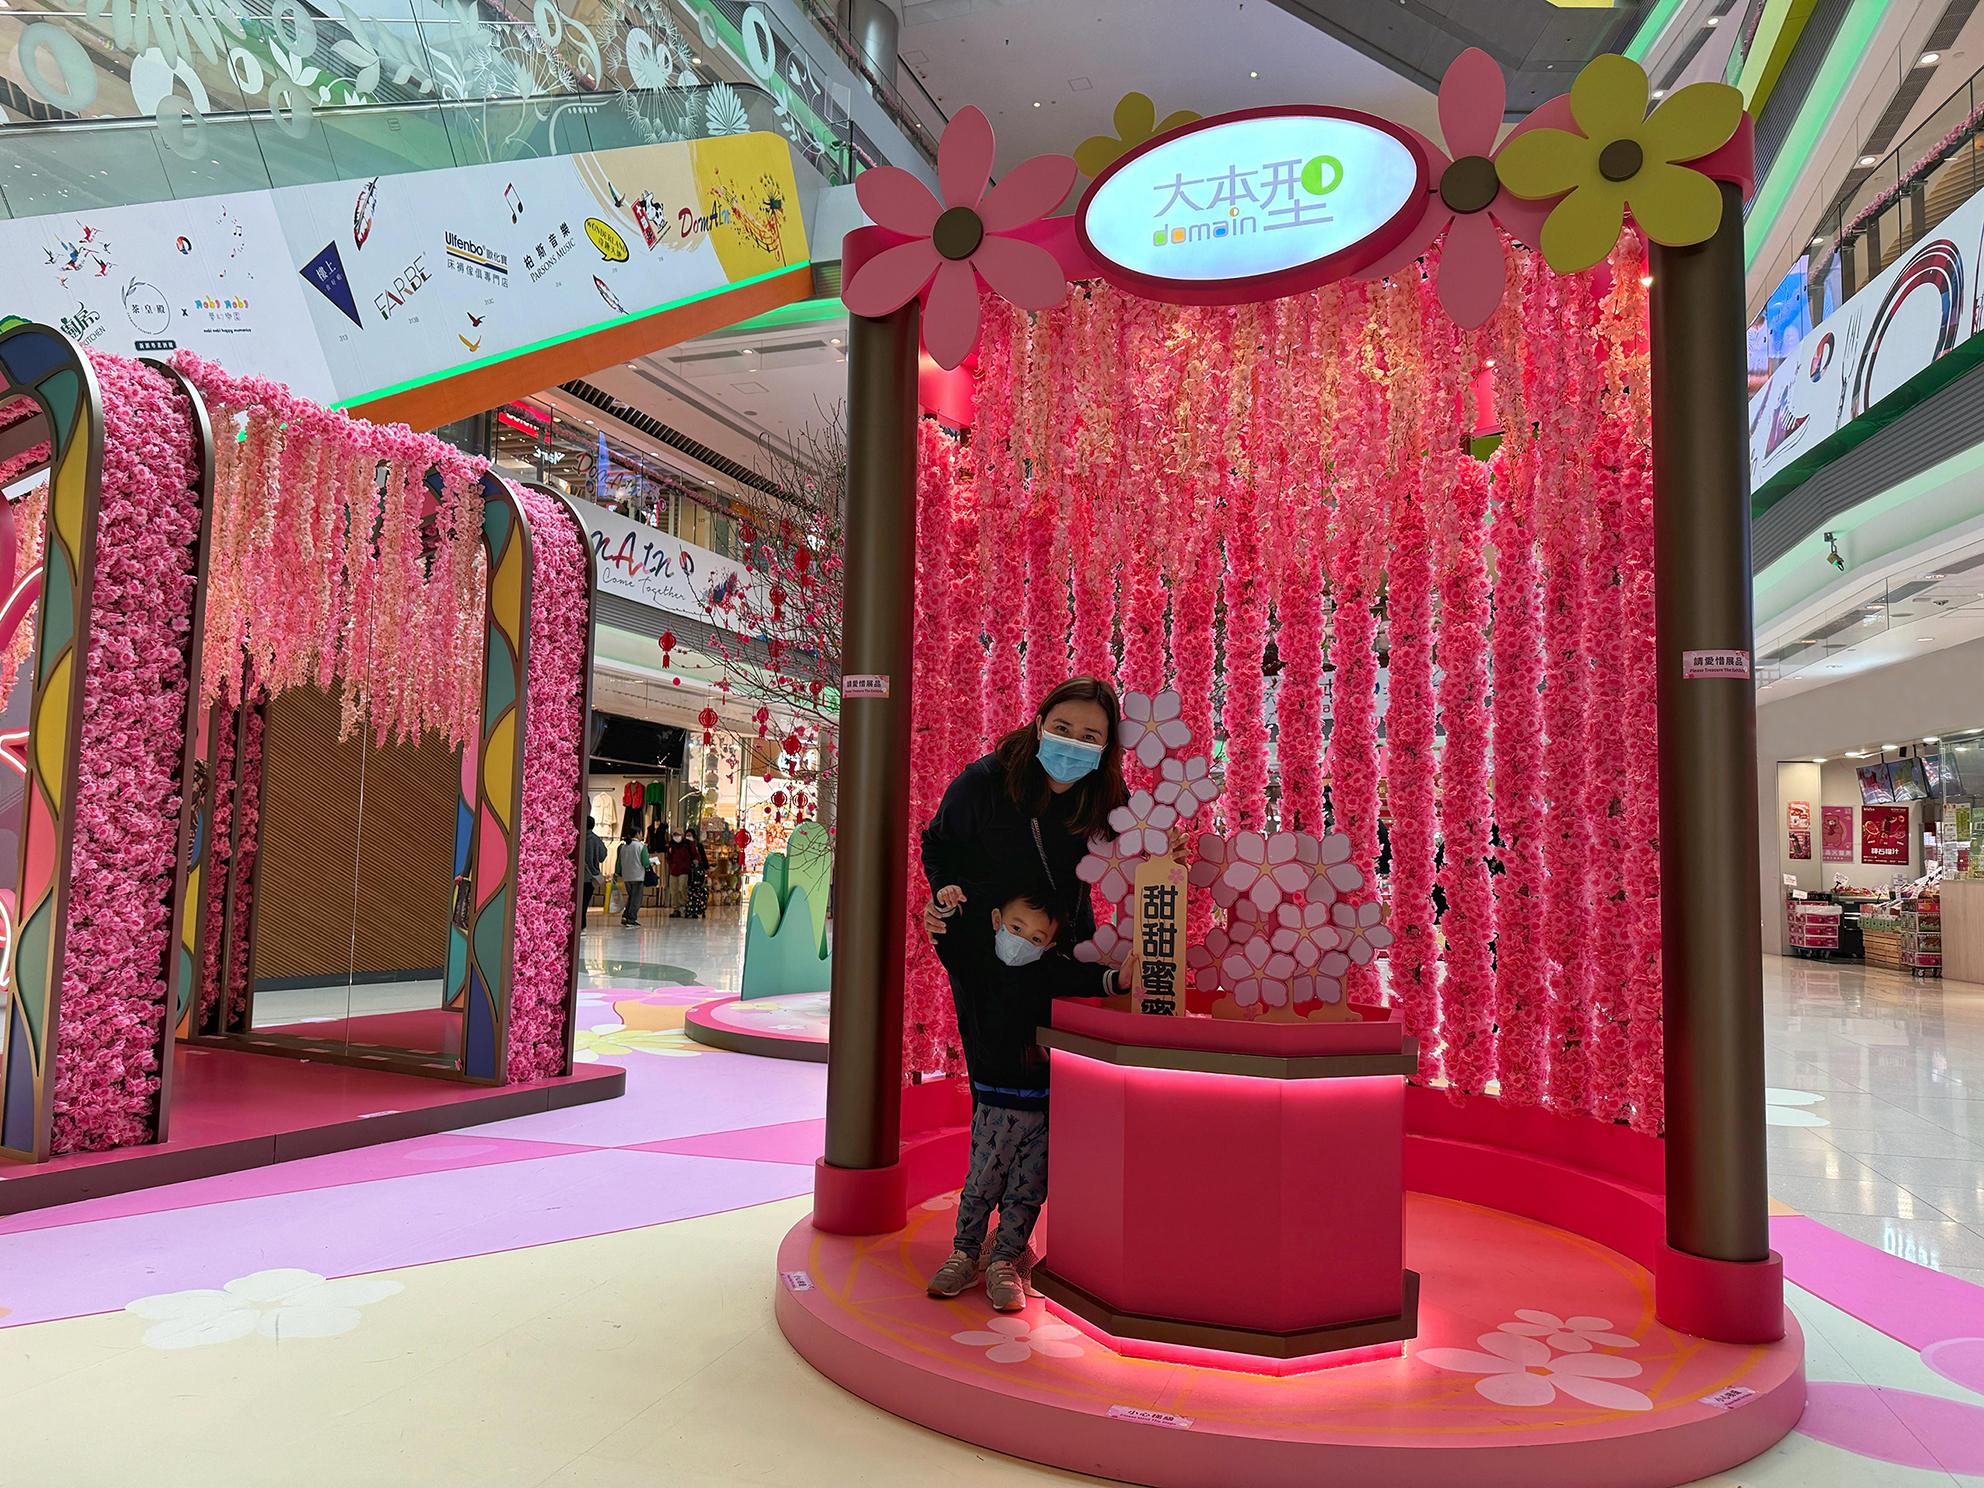 To welcome the Year of the Dragon, the Hong Kong Housing Authority has arranged celebratory events for shoppers to celebrate the new year and help boost the economy. Photo shows a 5-metre-long blossom mirror walk and floral lucky stick decorations at the ground floor atrium of the regional shopping centre, Domain, in Yau Tong.